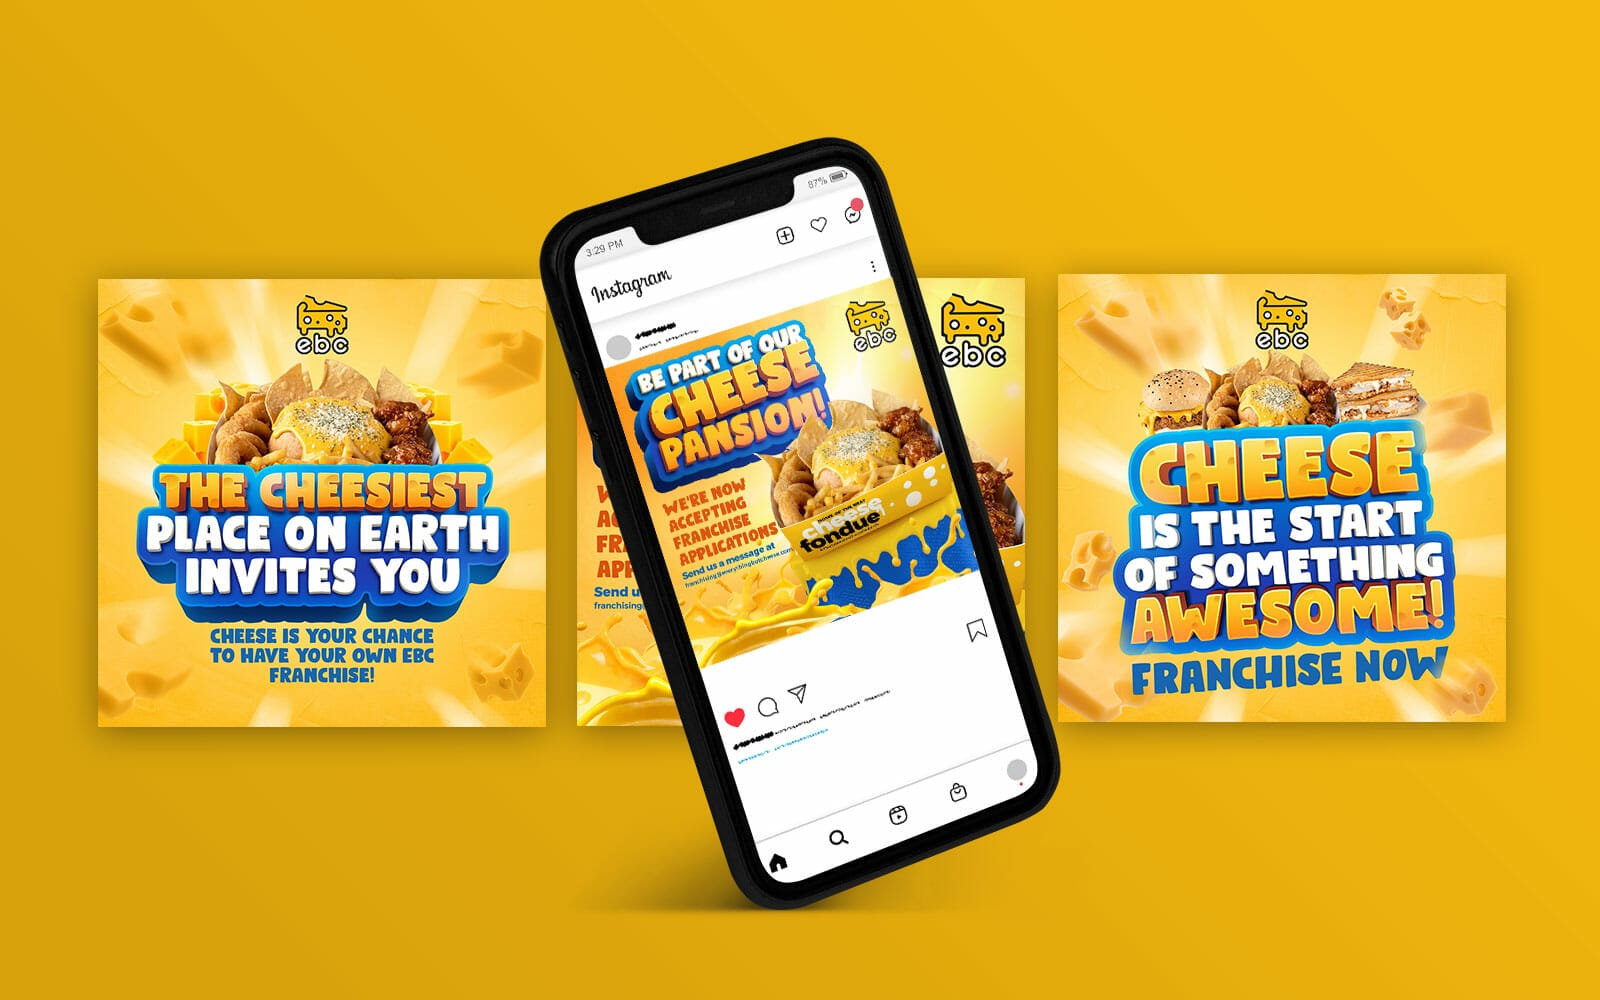 A phone with a poster for the cheese party.